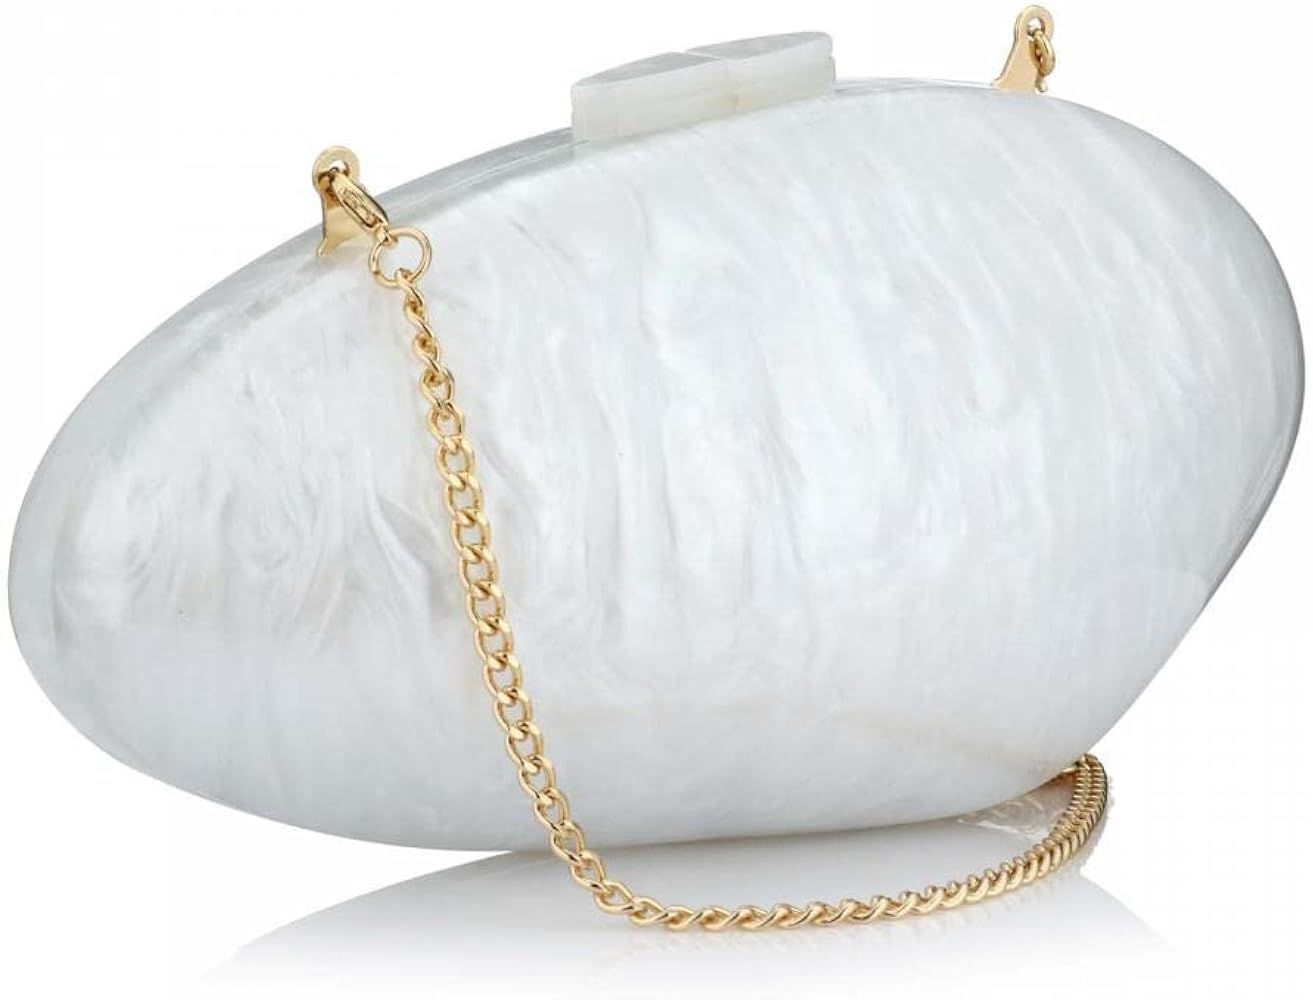 Gets Acrylic Purses and Handbags for Women Shell Shape Shoulder Crossbody Bag with Chain Clutch Purs | Amazon (US)